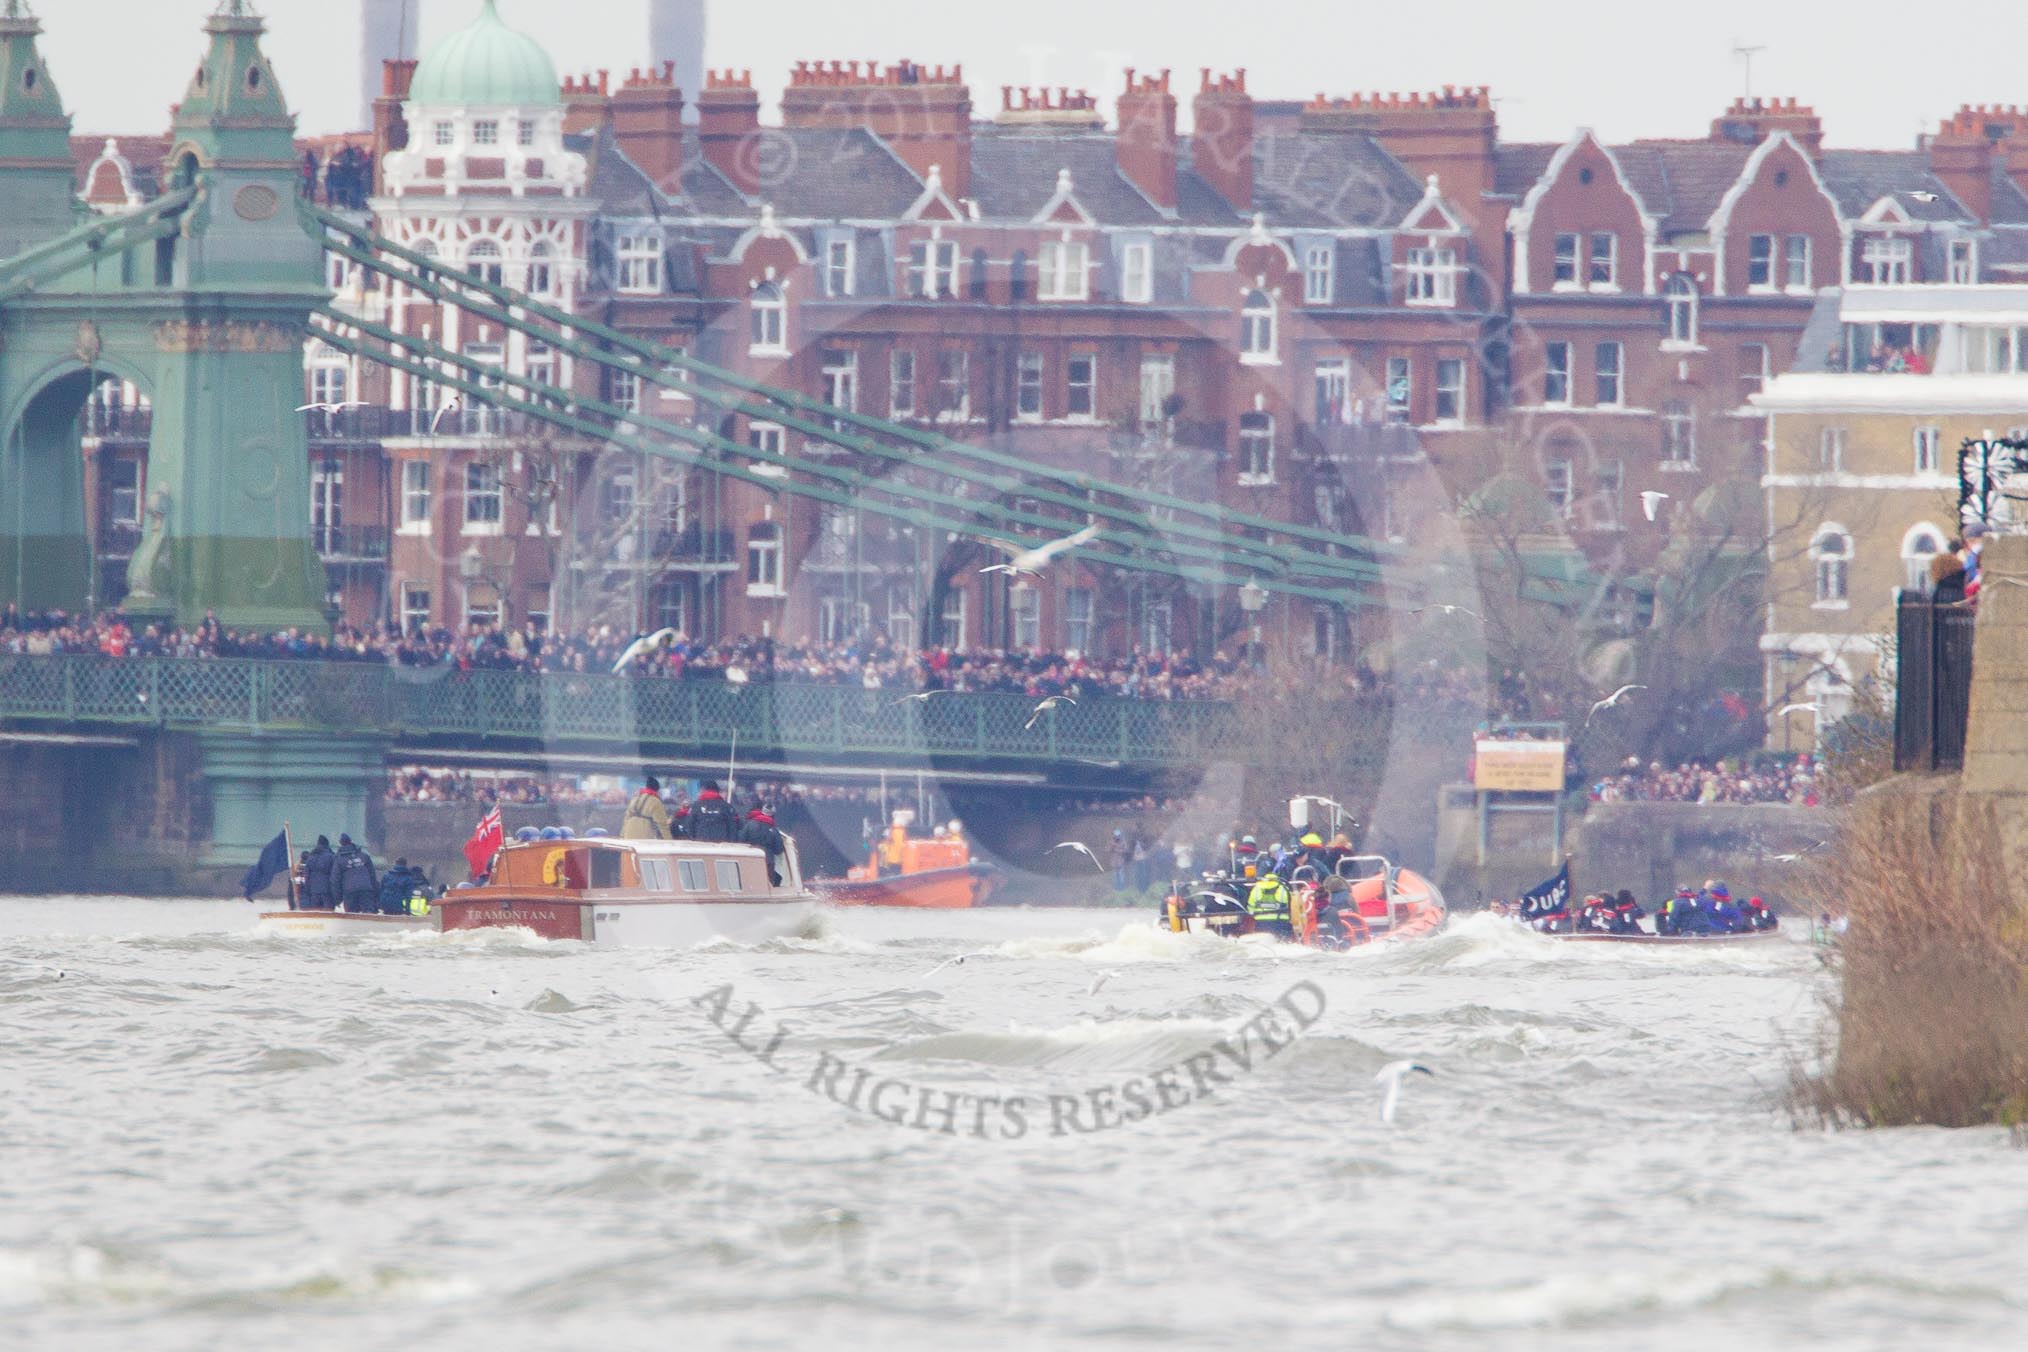 The Boat Race 2013.
Putney,
London SW15,

United Kingdom,
on 31 March 2013 at 16:35, image #339